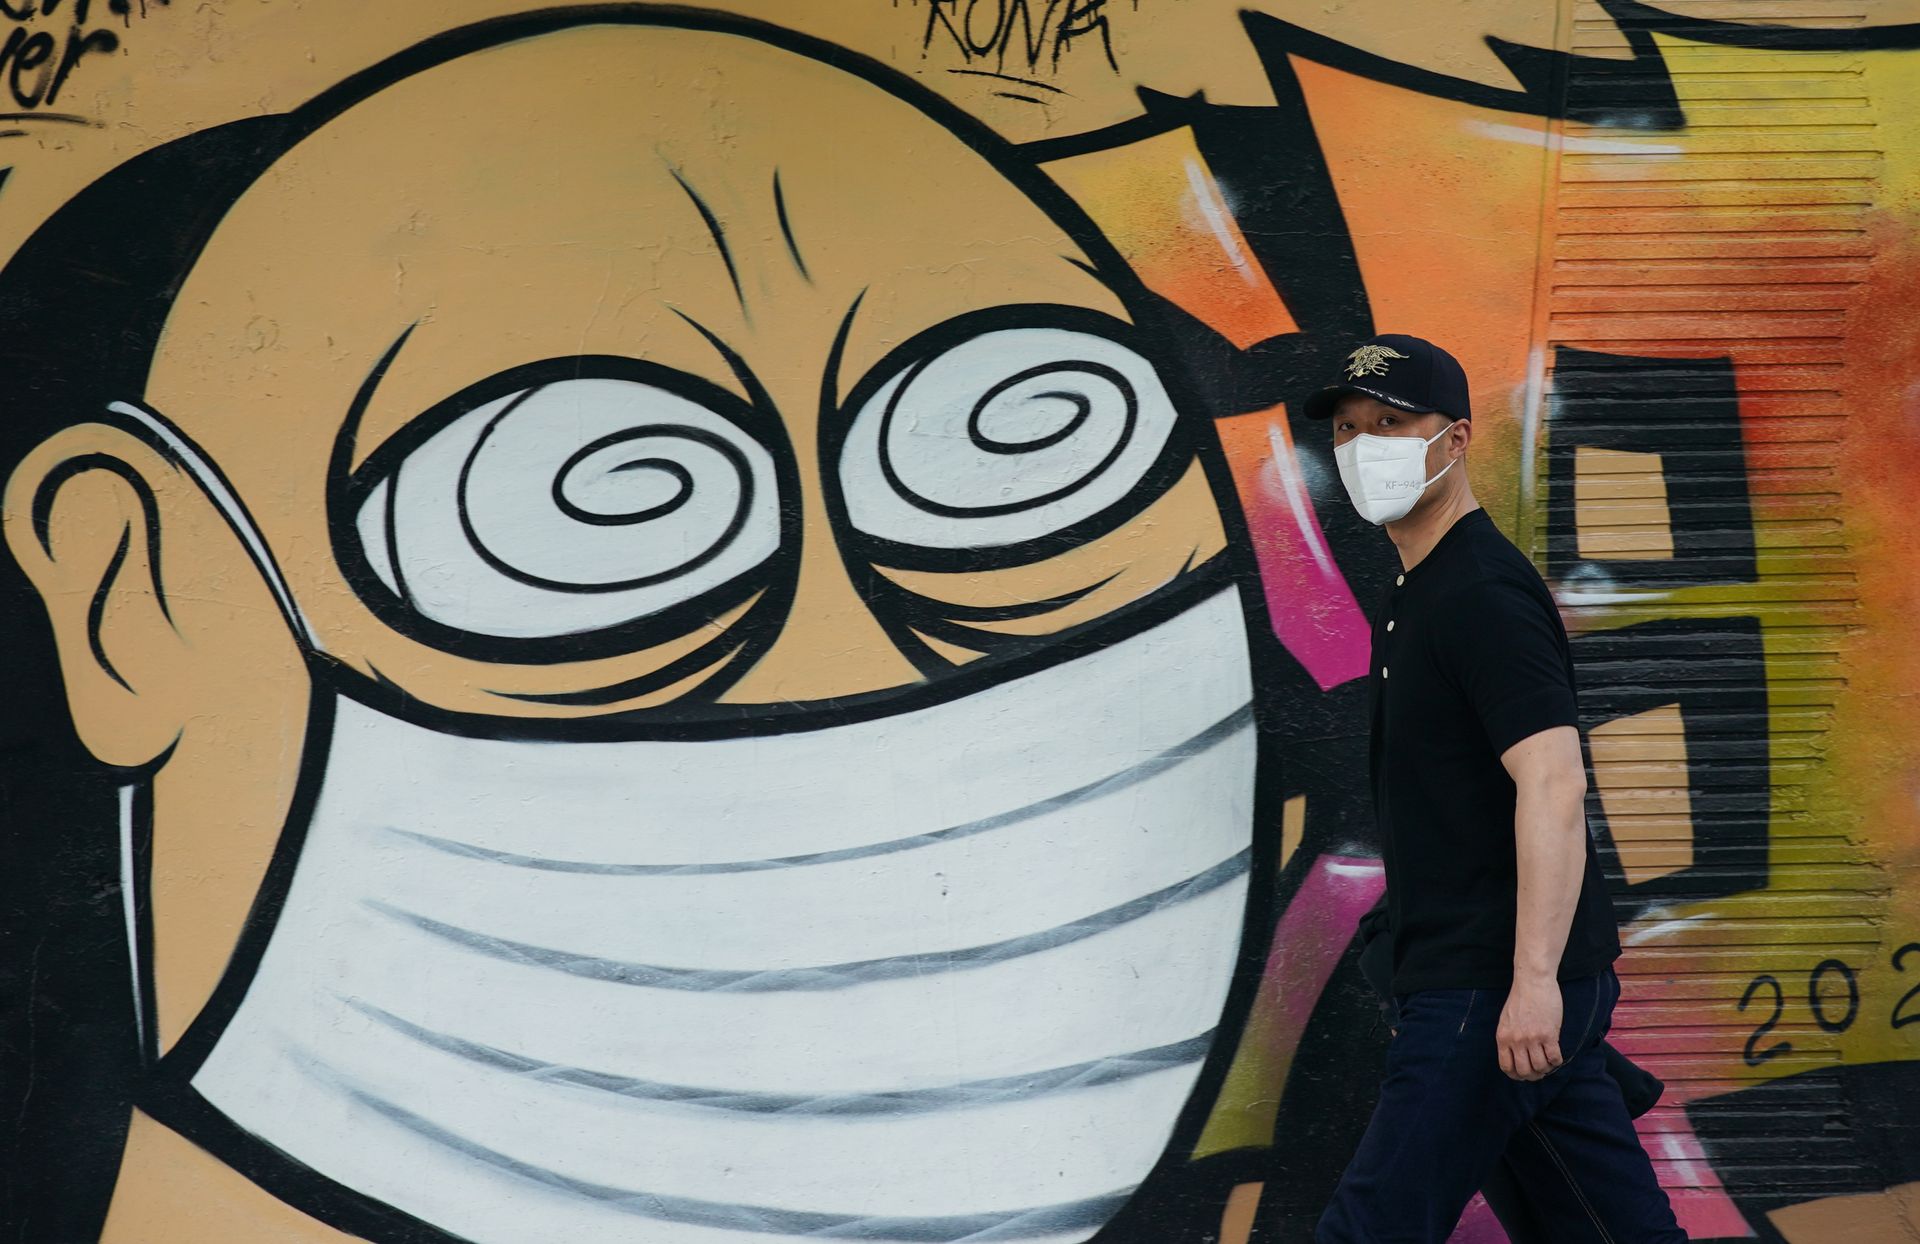 A pedestrian wears a protective mask while walking past a graffiti artwork showing a man wearing a protective mask in Shanghai, China.

Photo: Yves Dean/Getty Images